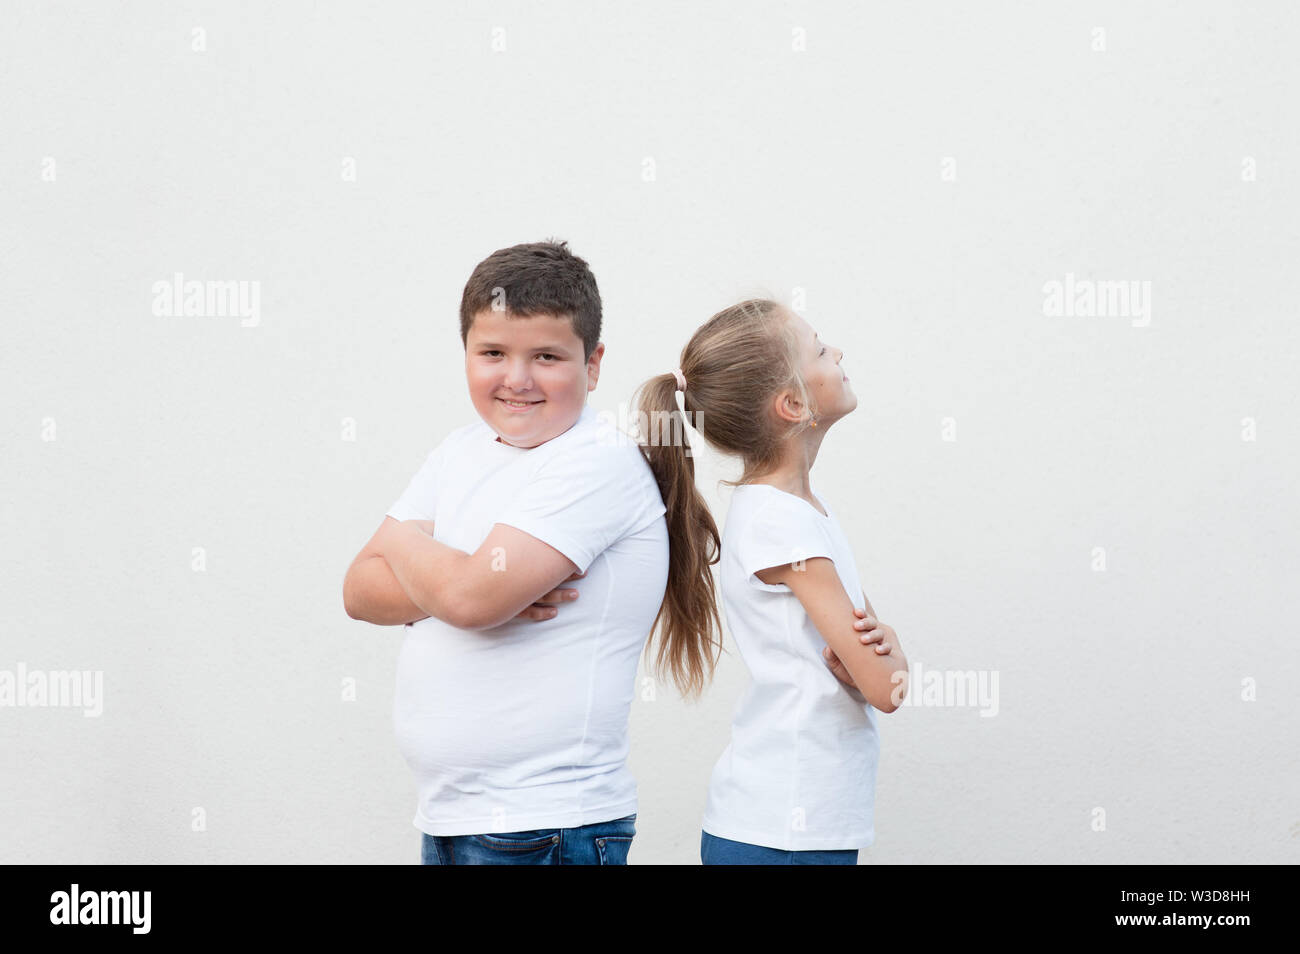 concept of thin girl and thick boy in white shirt standing back to back on white wall background Stock Photo